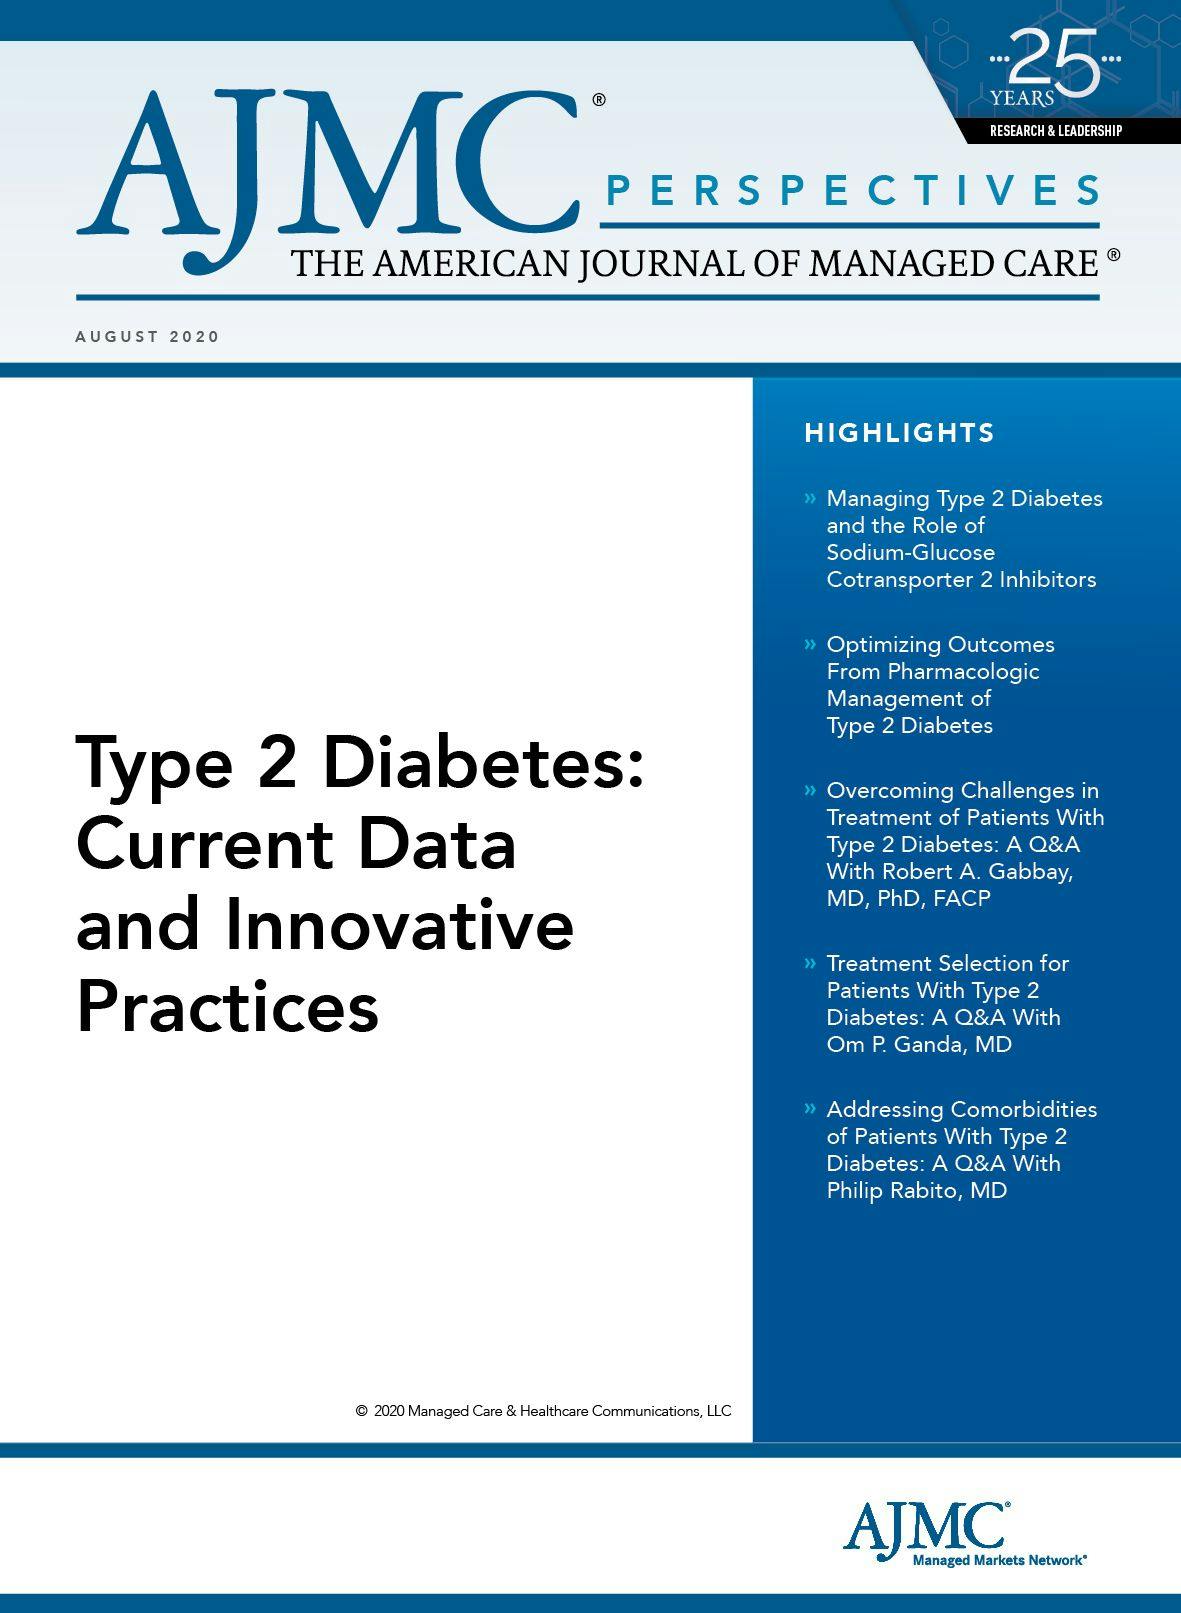 Type 2 Diabetes: Current Data and Innovative Practices